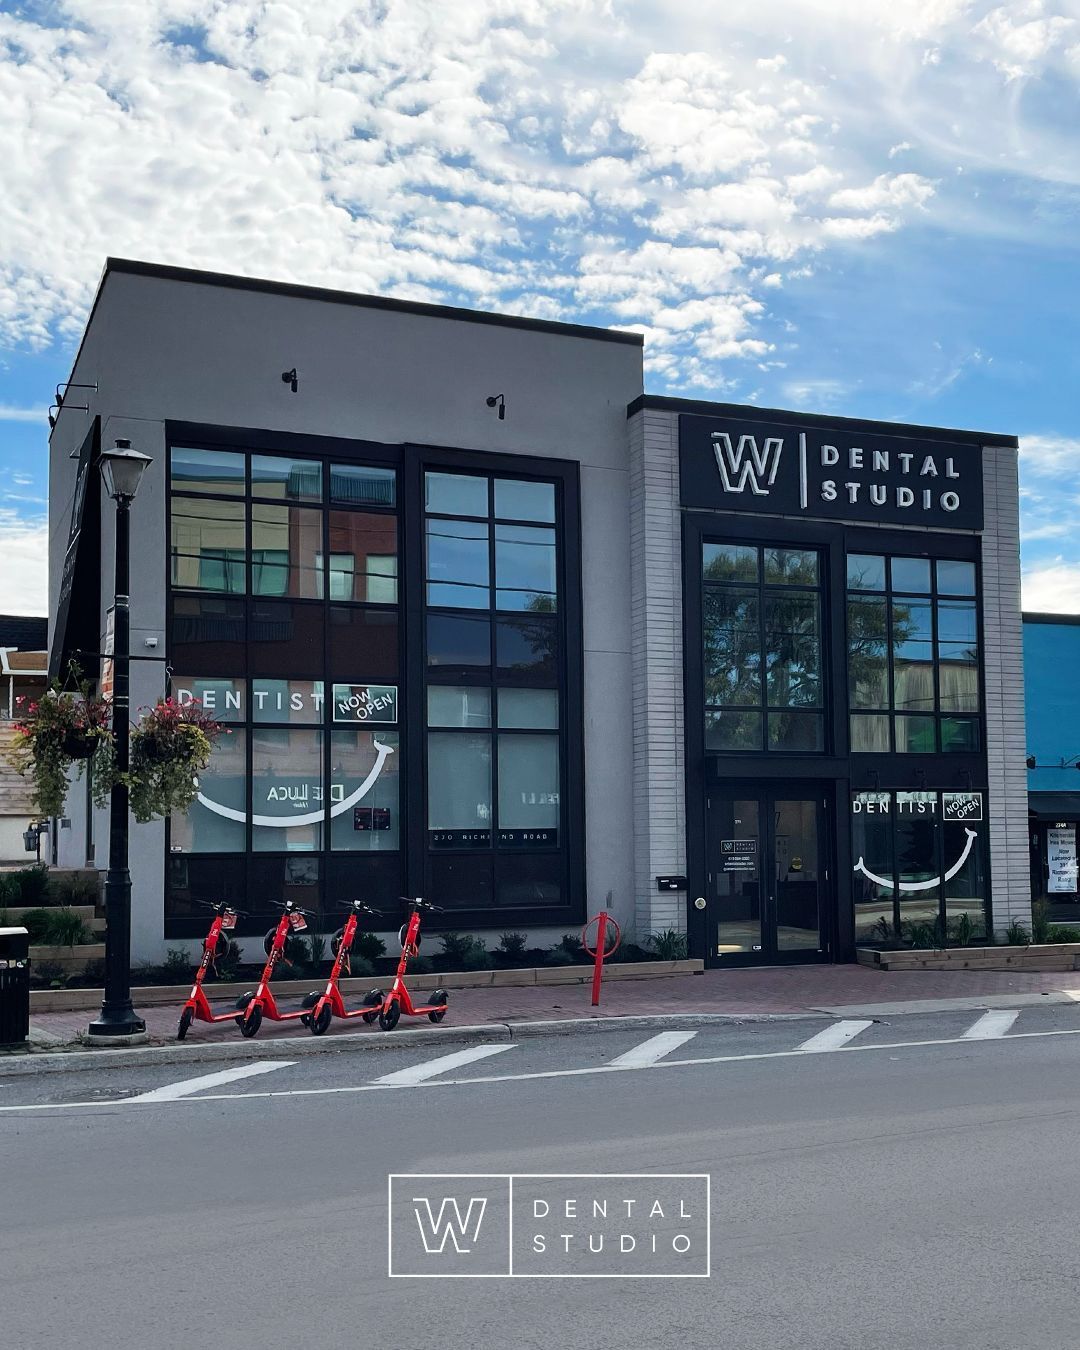 Have you spotted our office? We're located at 270 Richmond Rd. in Ottawa. Come visit us and become a patient! We're always accepting new families! 

📱613-564-3300
📧 info@wdentalstudio.com